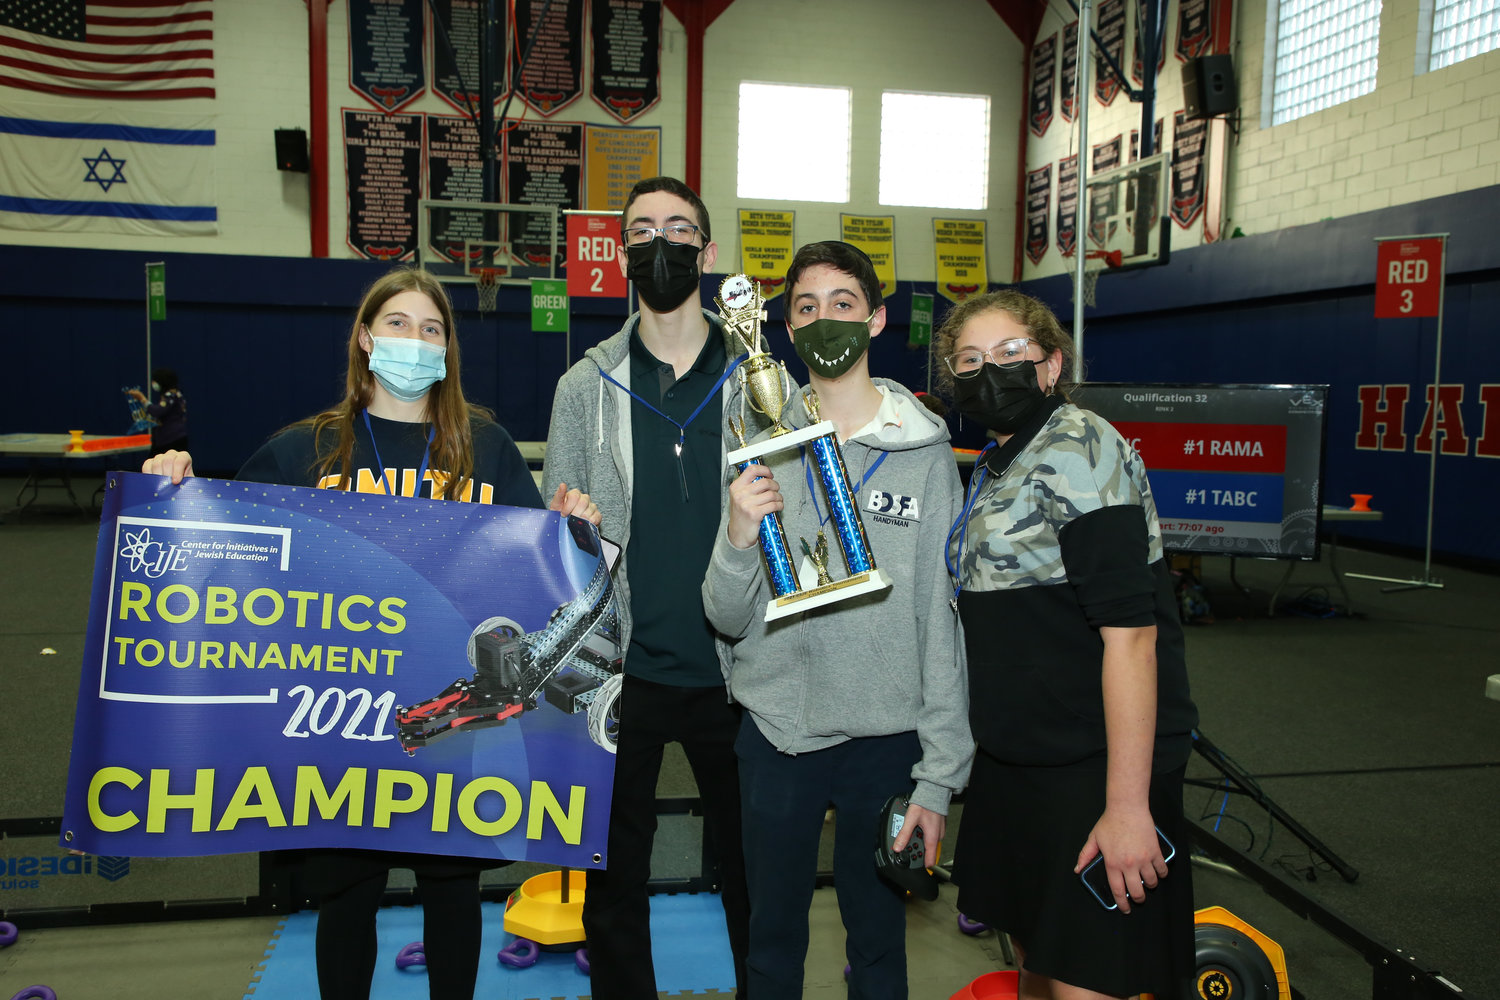 The Hebrew Academy of the Five Towns and Rockaway High School robotics team captured its first-ever first place trophy at the Center for Initiatives in Jewish Education Robotics Tournament on Dec. 16 at HAFTR. From left were Shirly Gottlieb, the Robotics Club president, and team members Sean Harris, Yoni Goldstein and Atara Smulevitz.